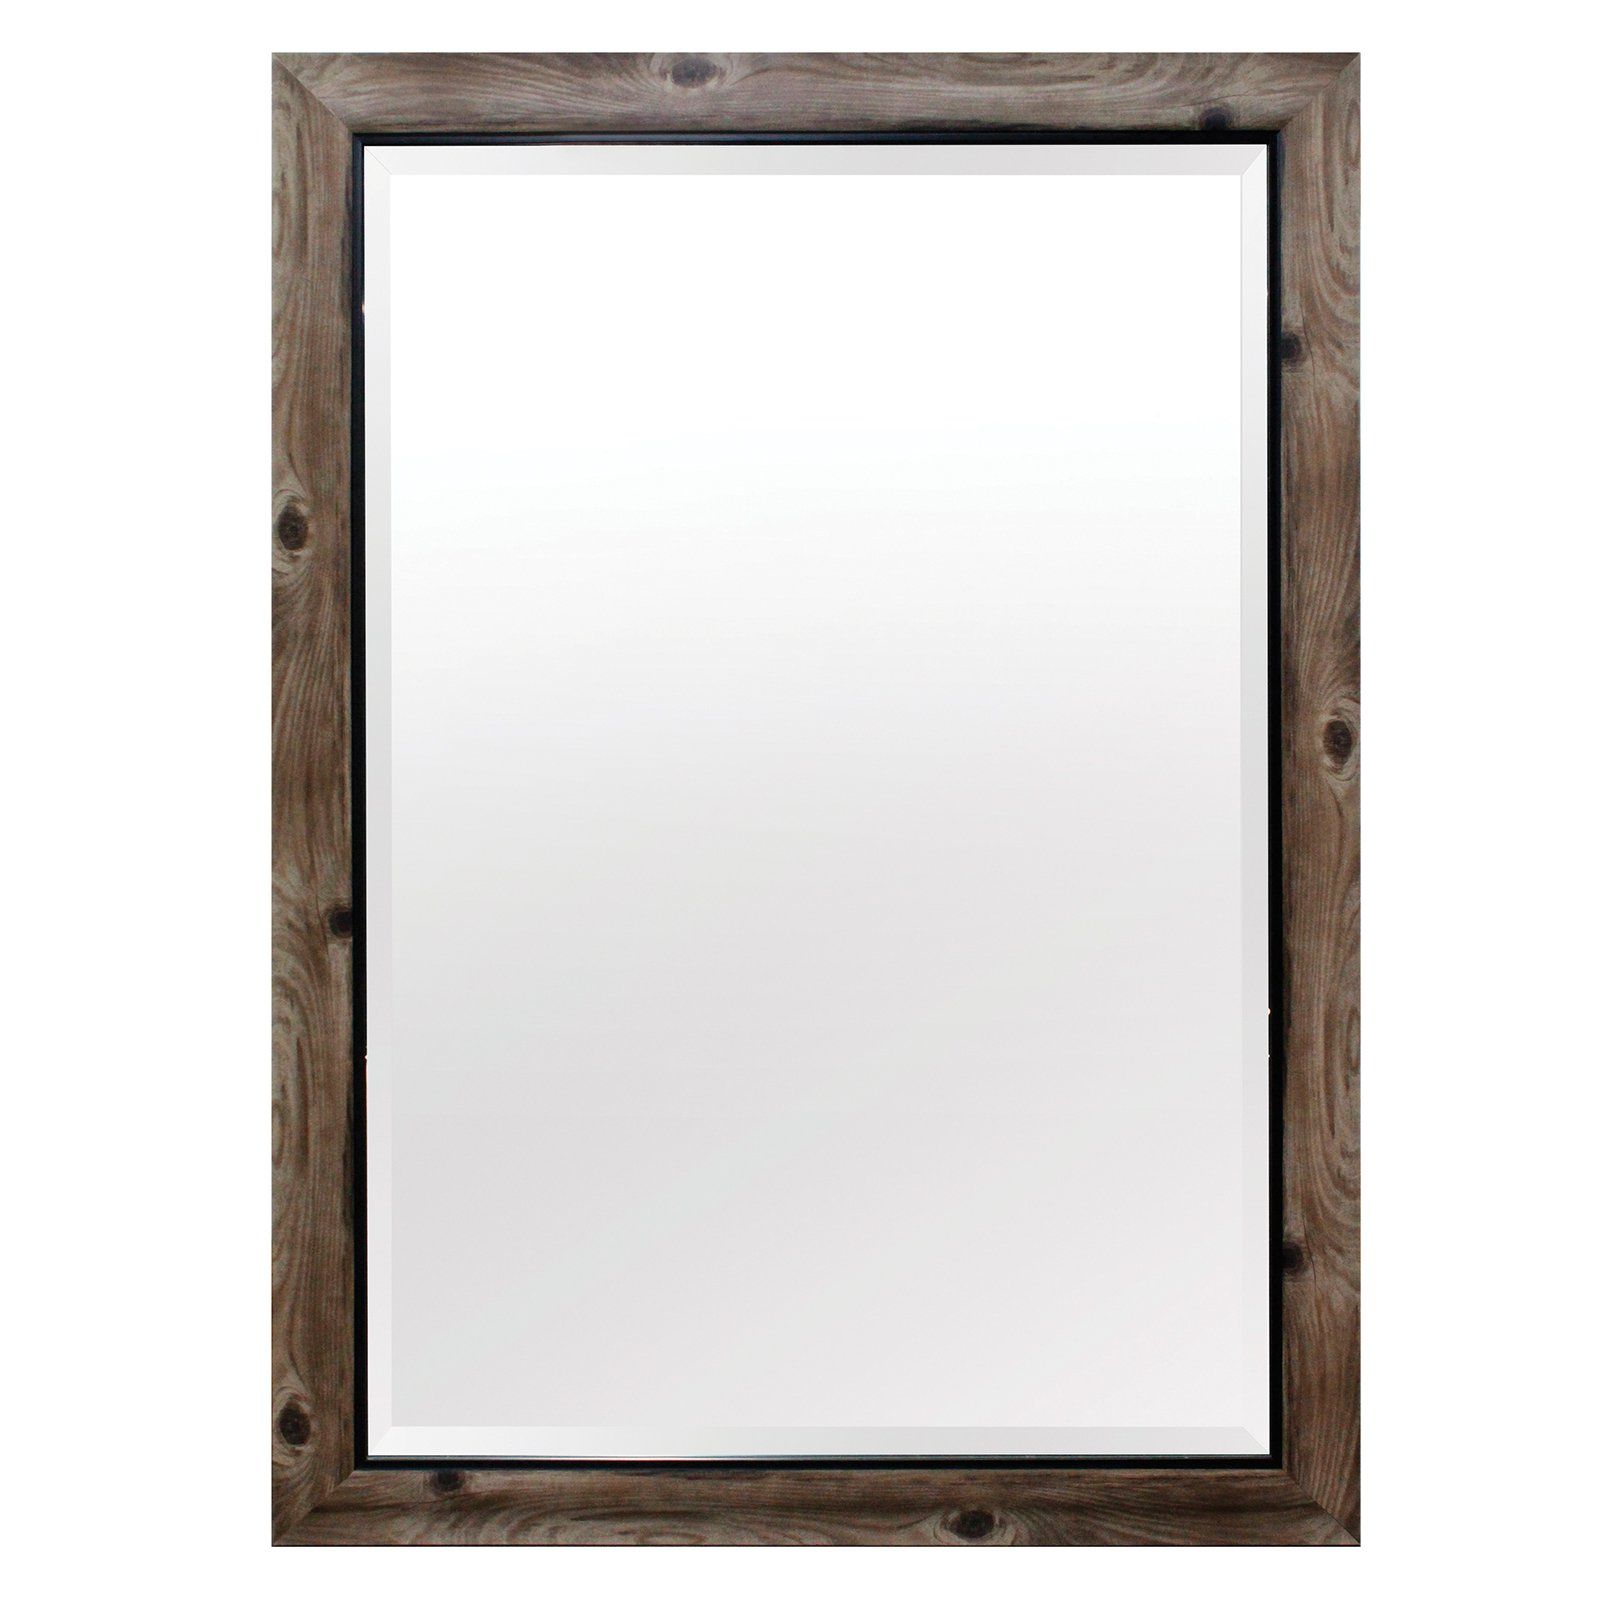 Yosemite Home Gray Wood Frame With Black Trim Wall Mirror – Walmart For Black Wood Wall Mirrors (View 13 of 15)